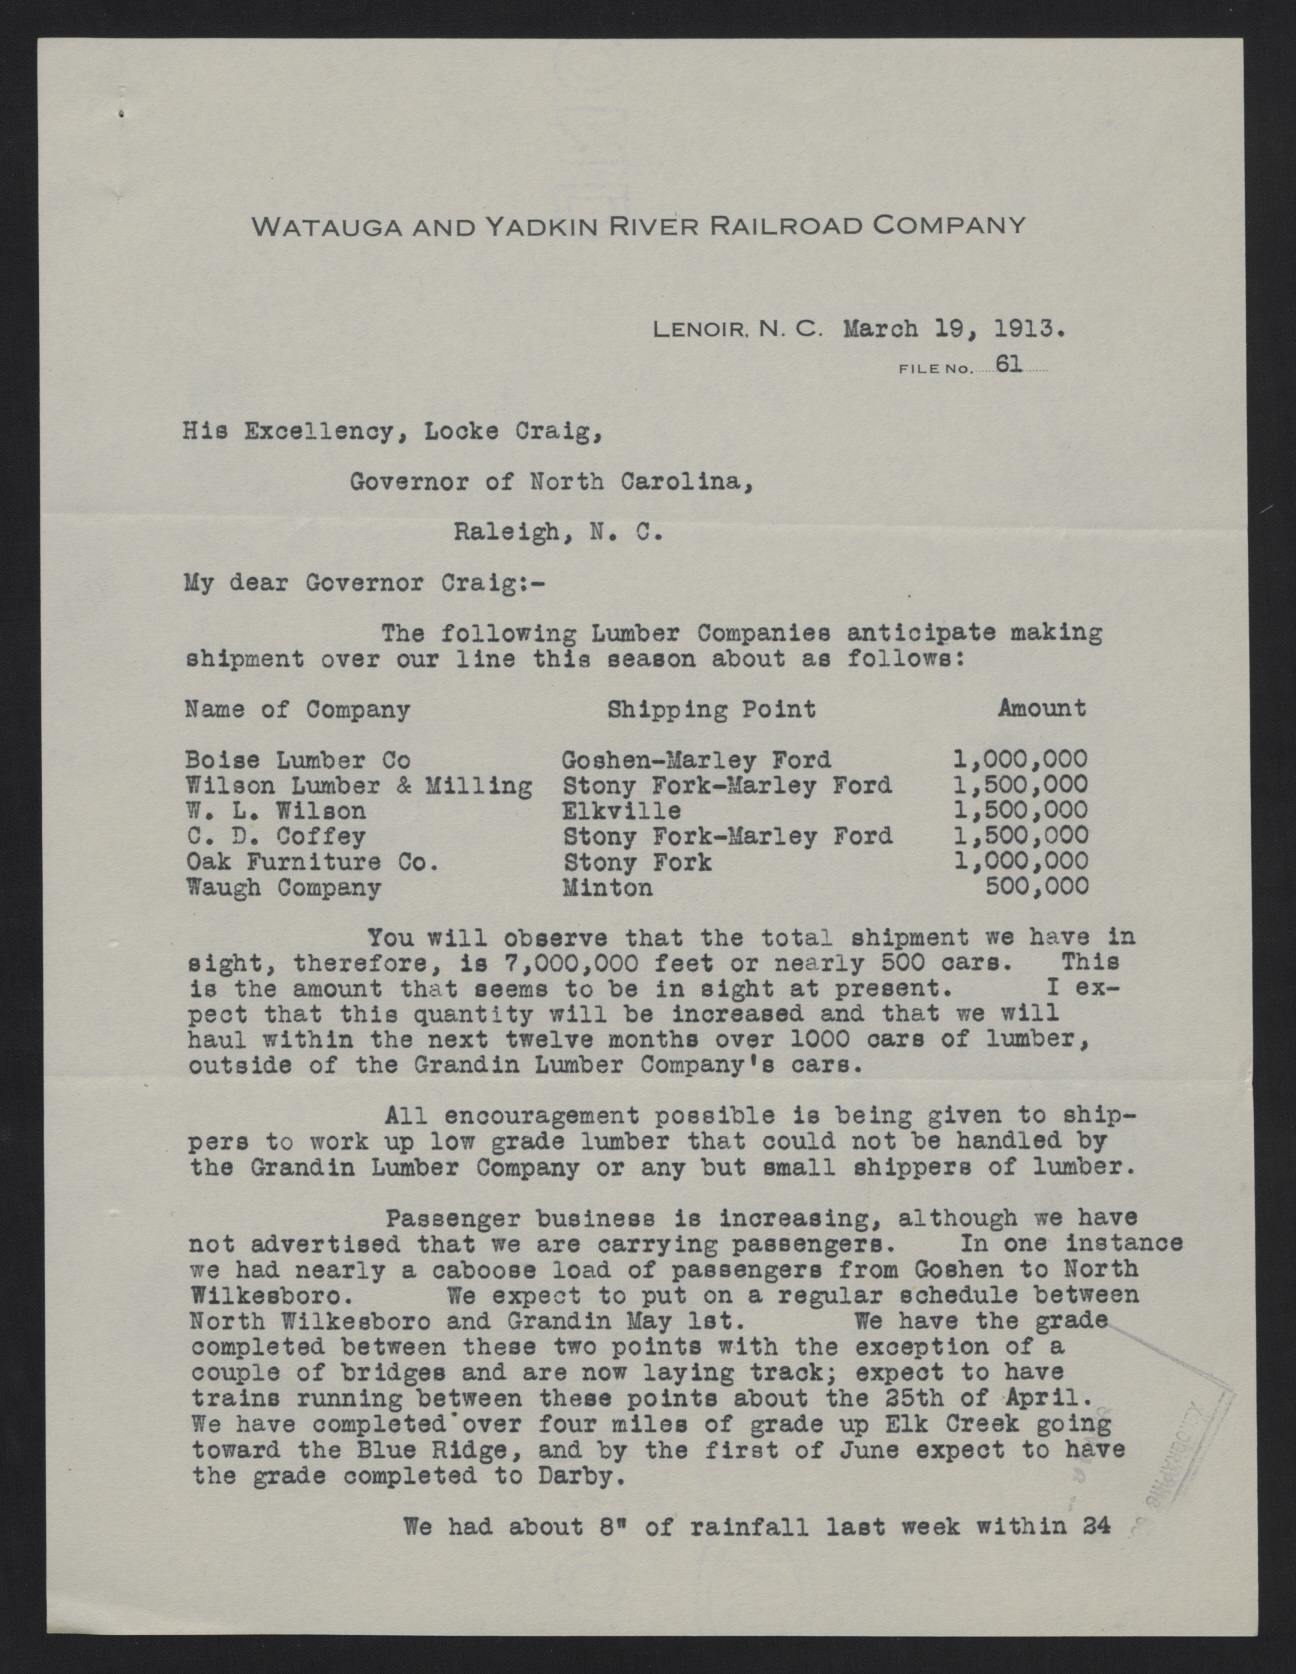 Letter from Grandin to Craig, March 19, 1913, page 1